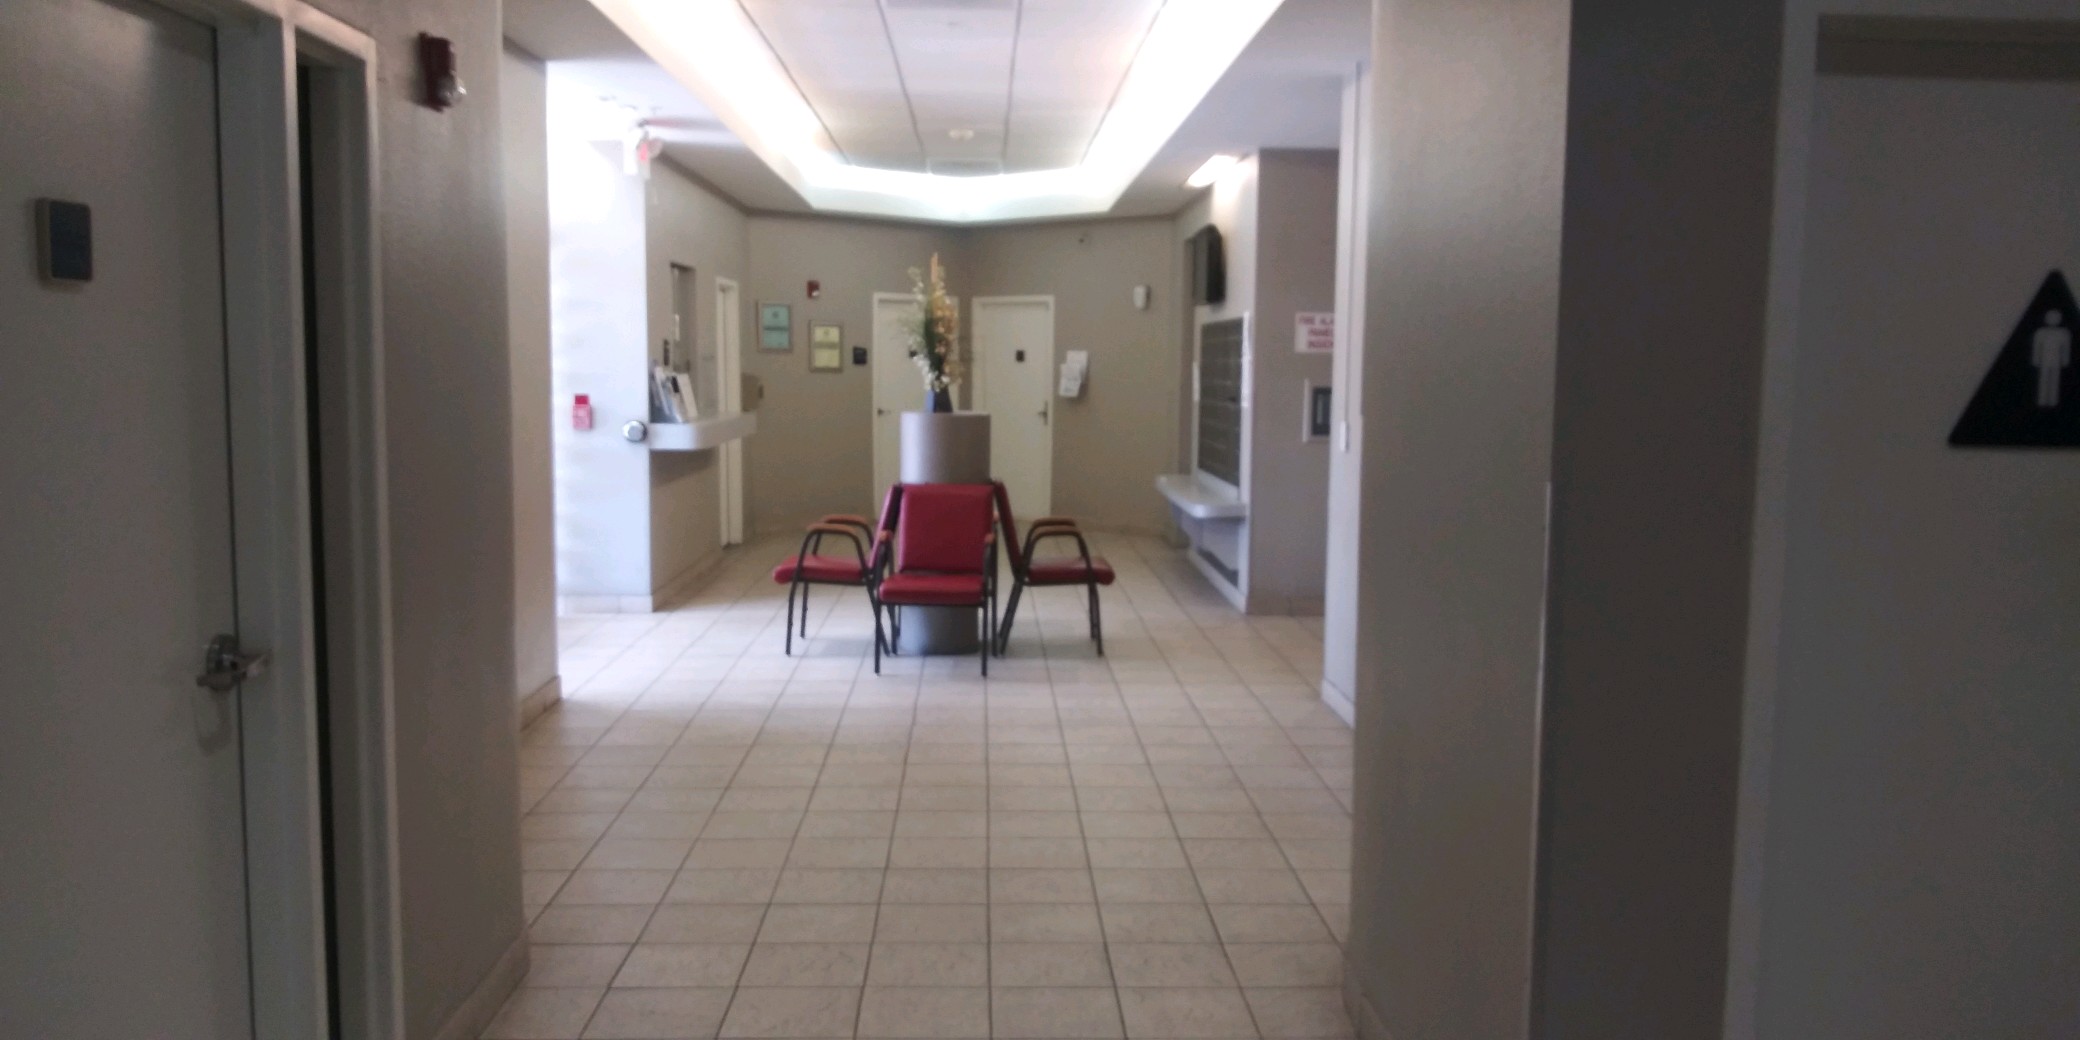 Side view of a lobby area. Room contains red chairs that are wrapped around a centerpiece with a plant that sits on top of it. There is an office window on one side of the room and three doors adjacent to it. There is a restroom entrance pictured.